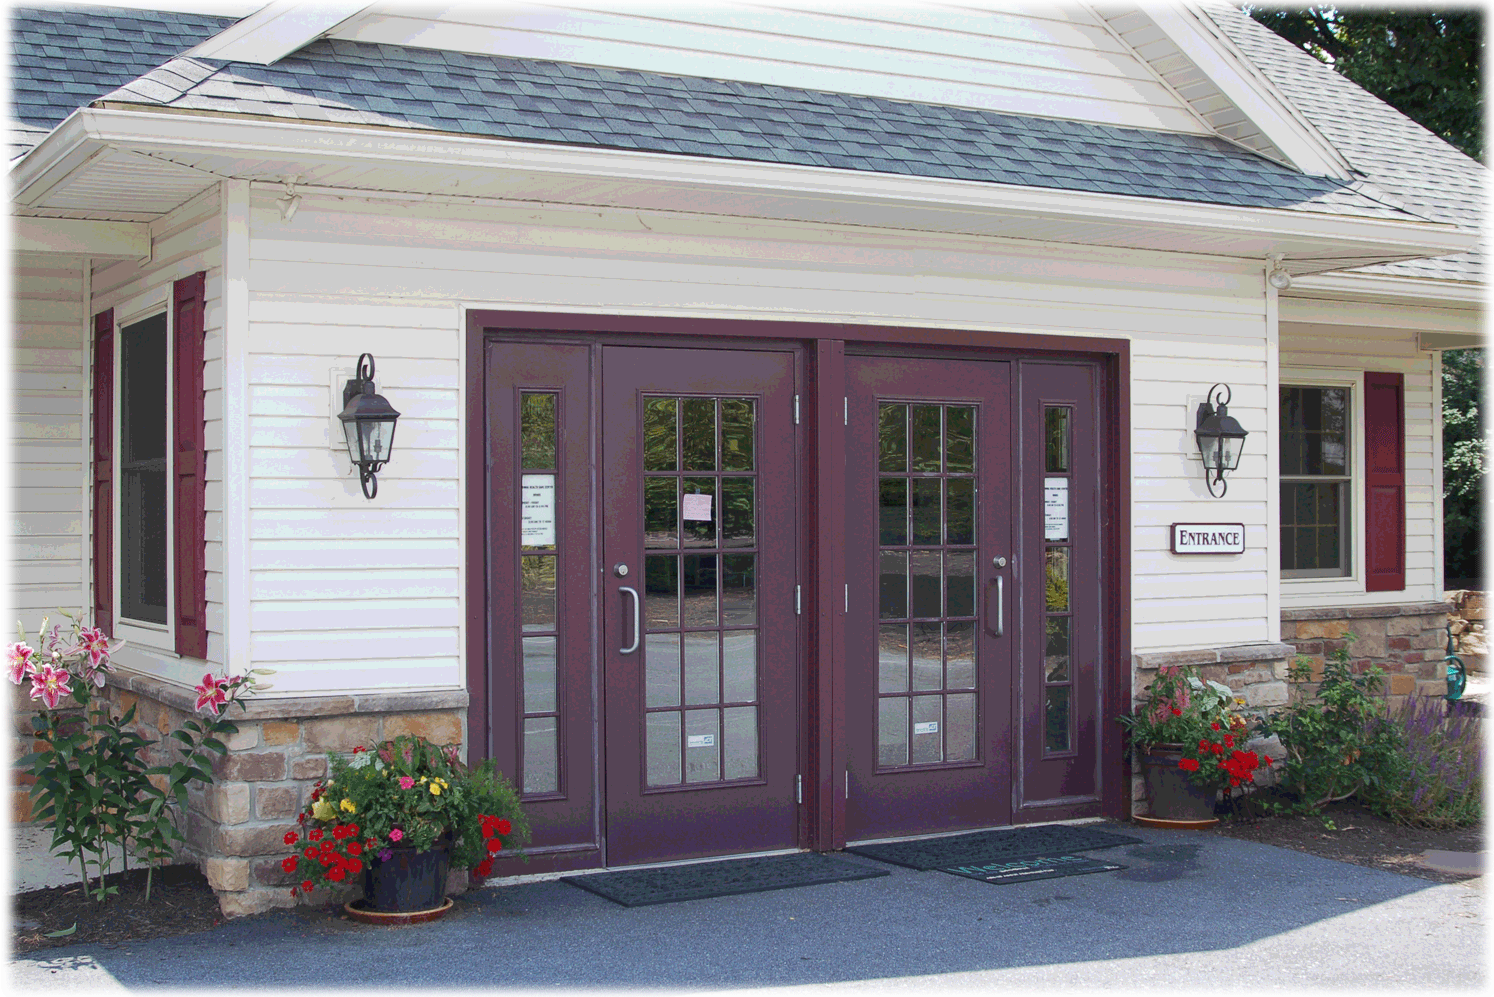 Entrance to the Animal Health Care Center of Hershey